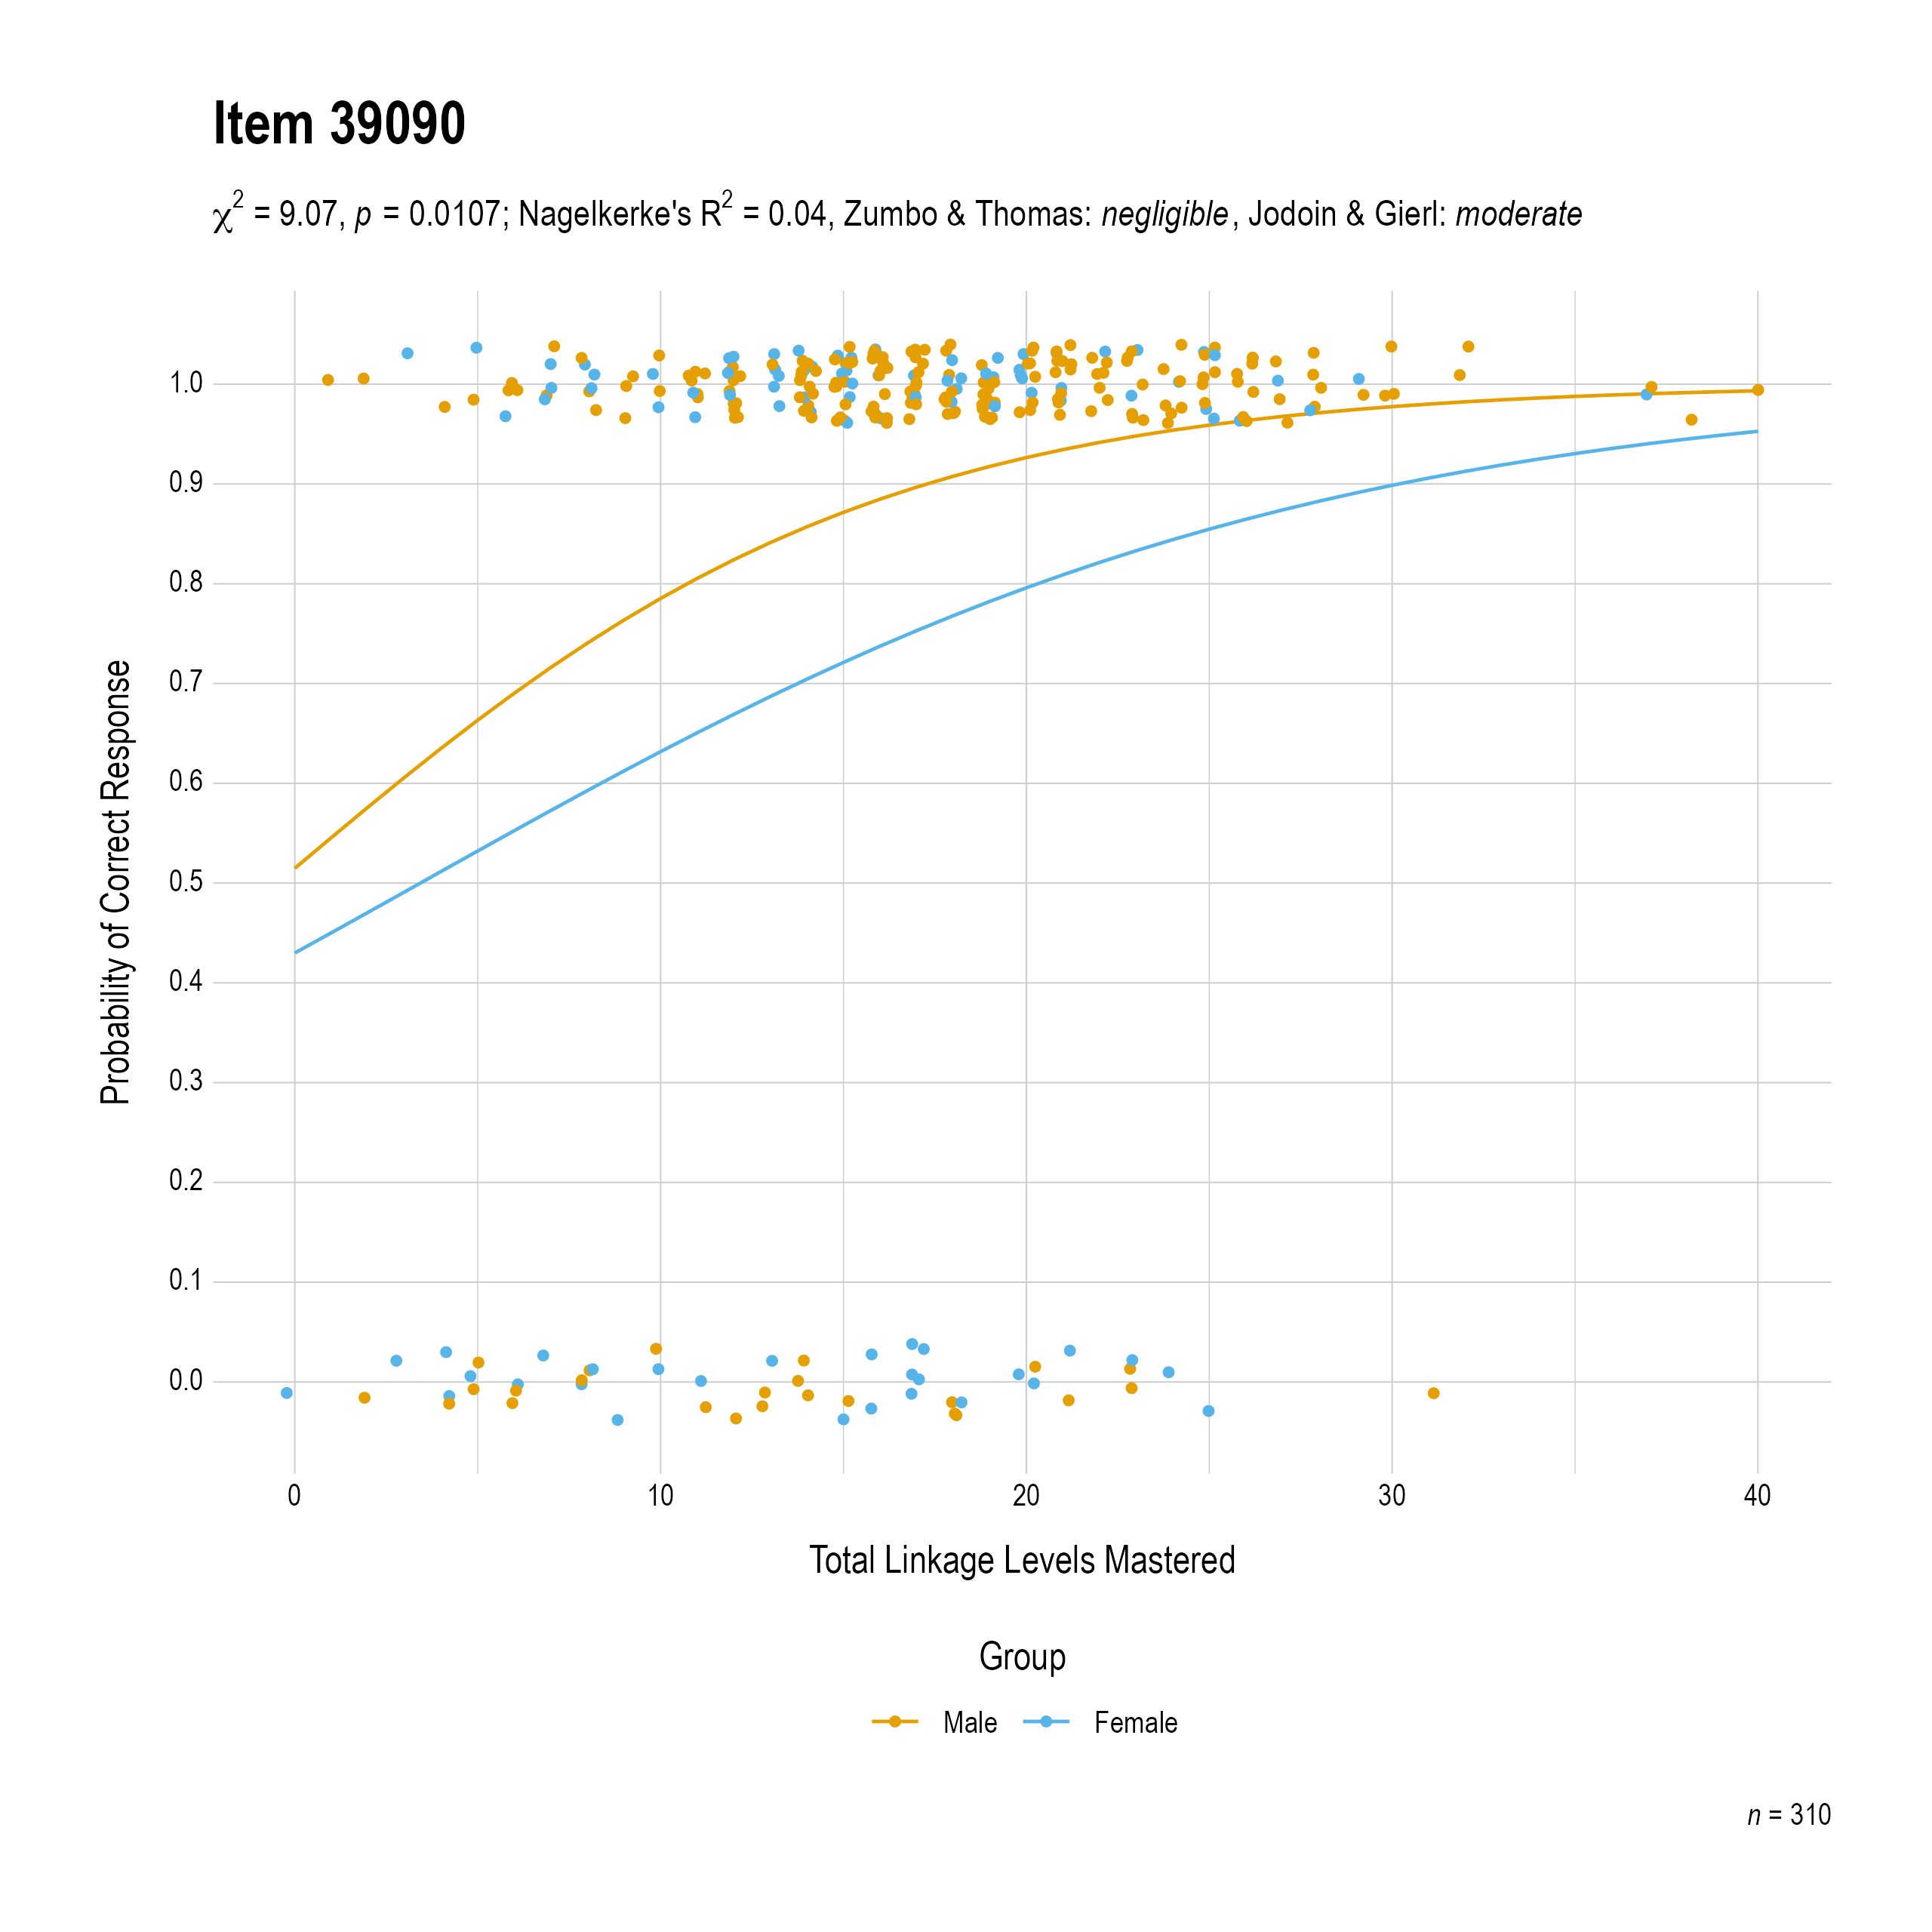 The plot of the combined gender differential item function evidence for Mathematics item 39090. The figure contains points shaded by group. The figure also contains a logistic regression curve for each group. The total linkage levels mastered in is on the x-axis, and the probability of a correct response is on the y-axis.